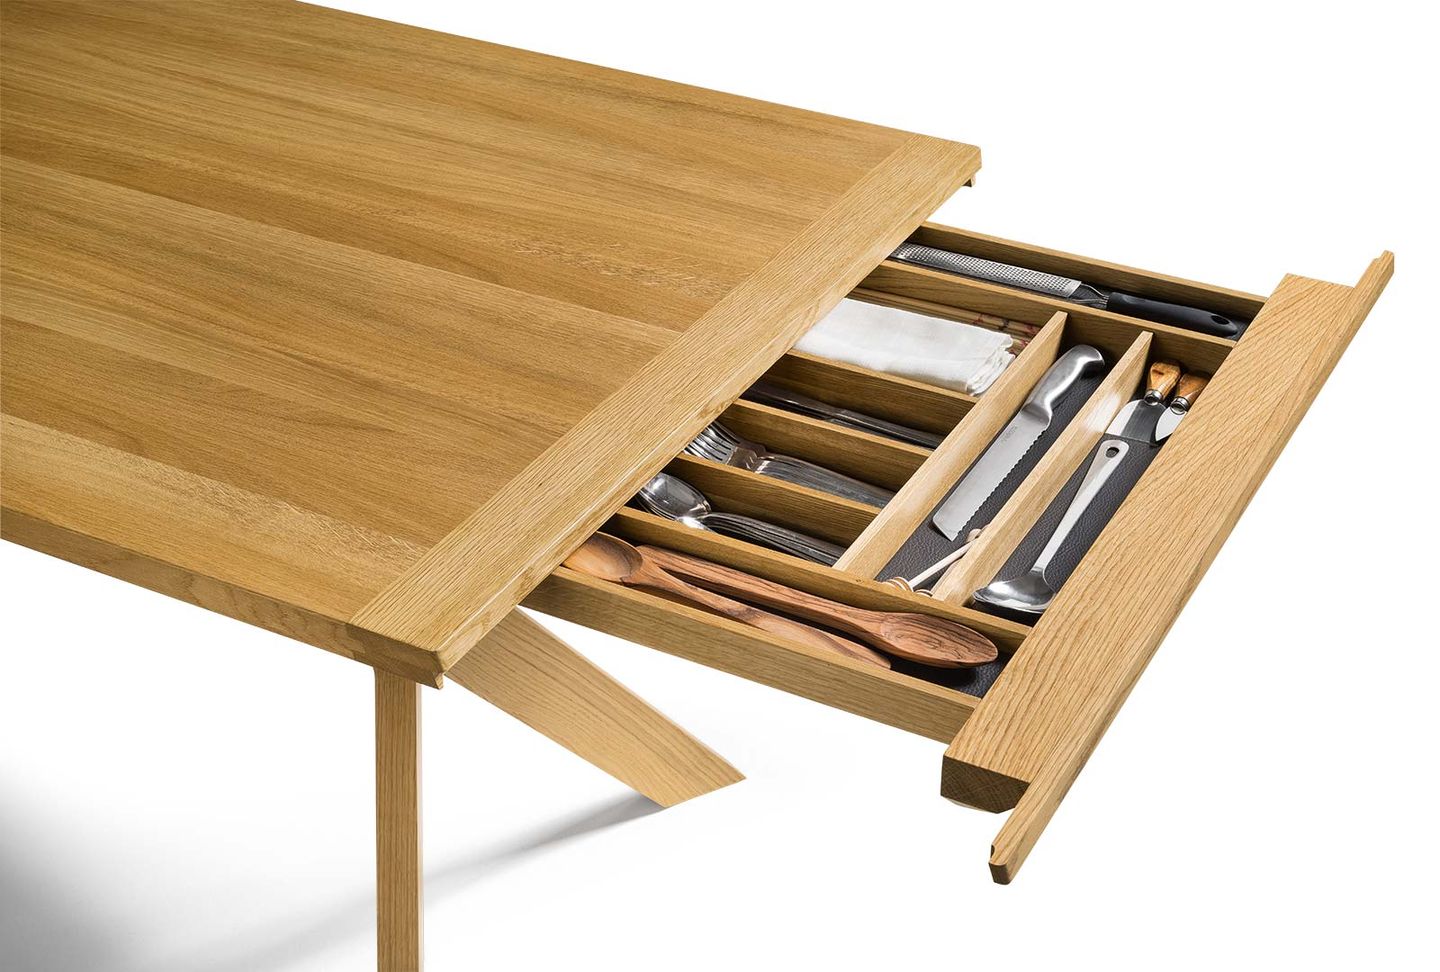 yps extendable table made of solid wood with cutlery drawer